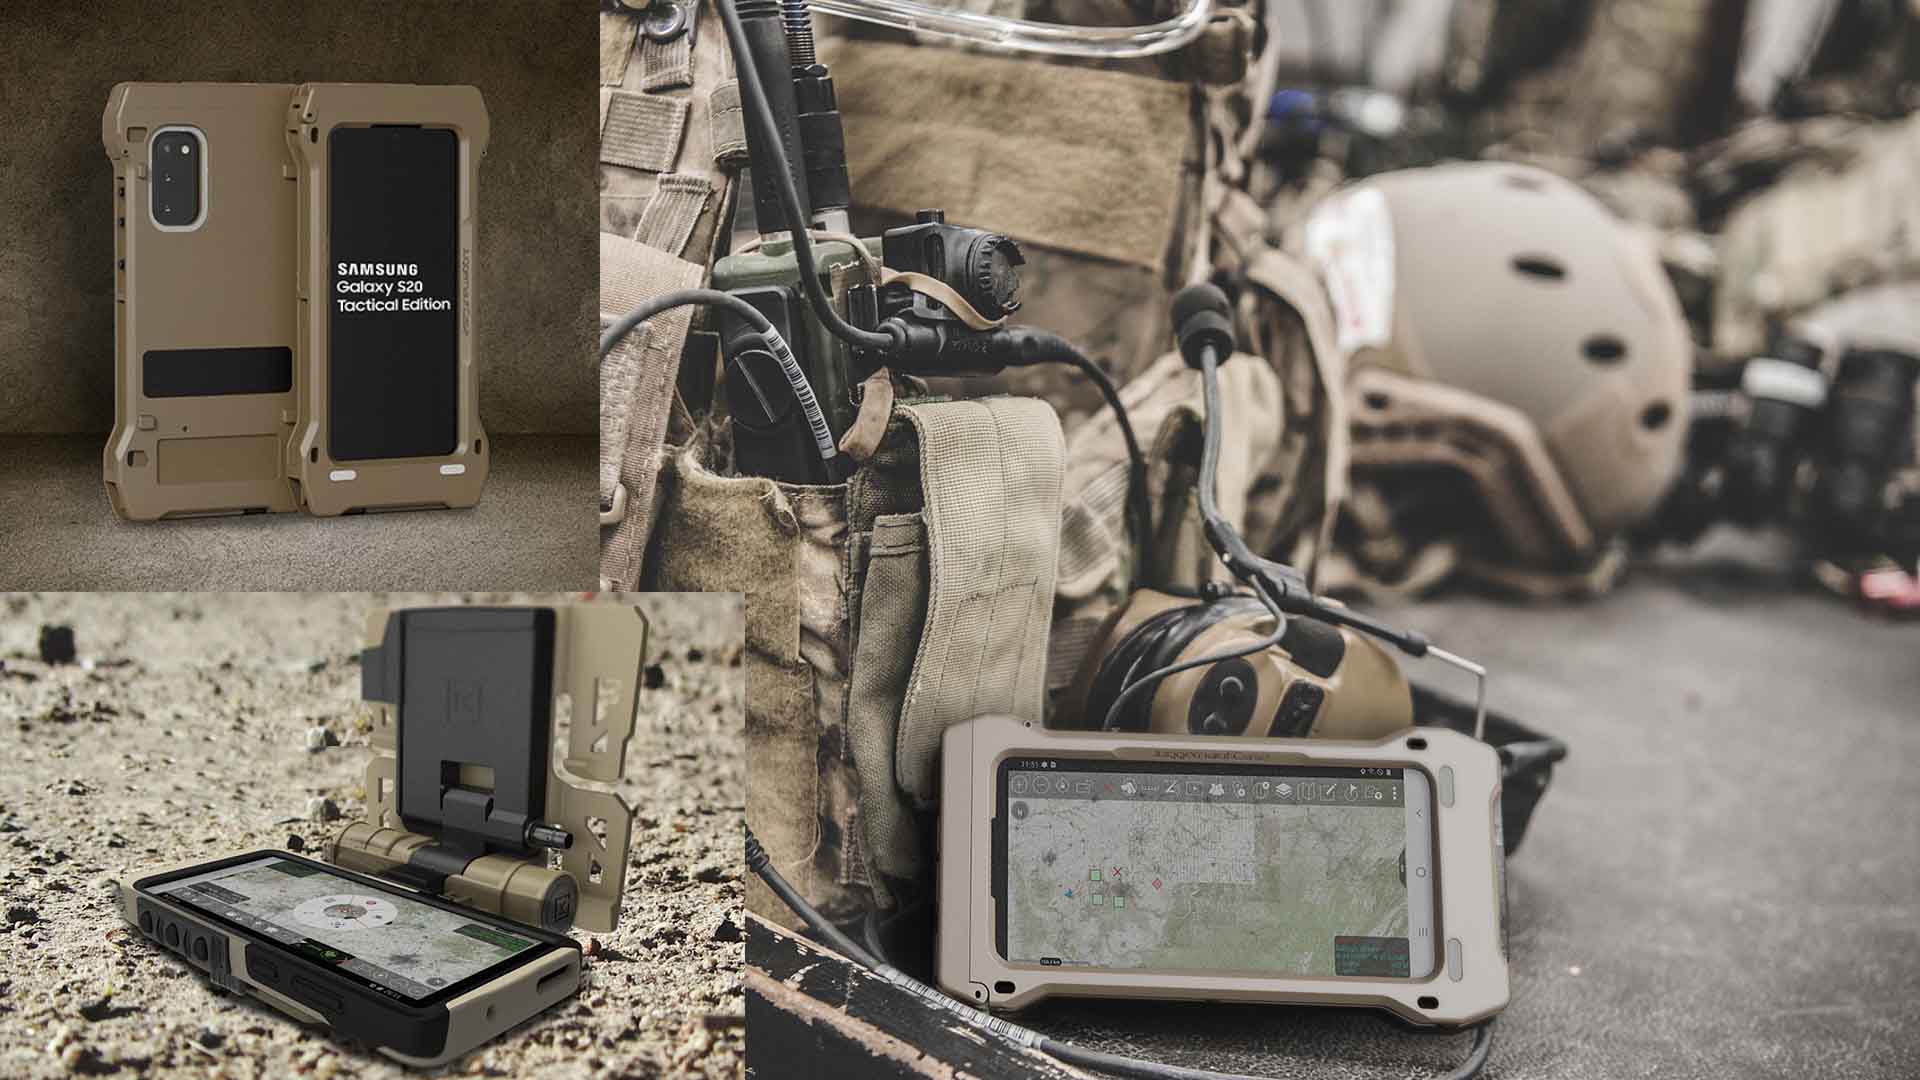 Samsung produced a specially designed tactical smartphone for military use.